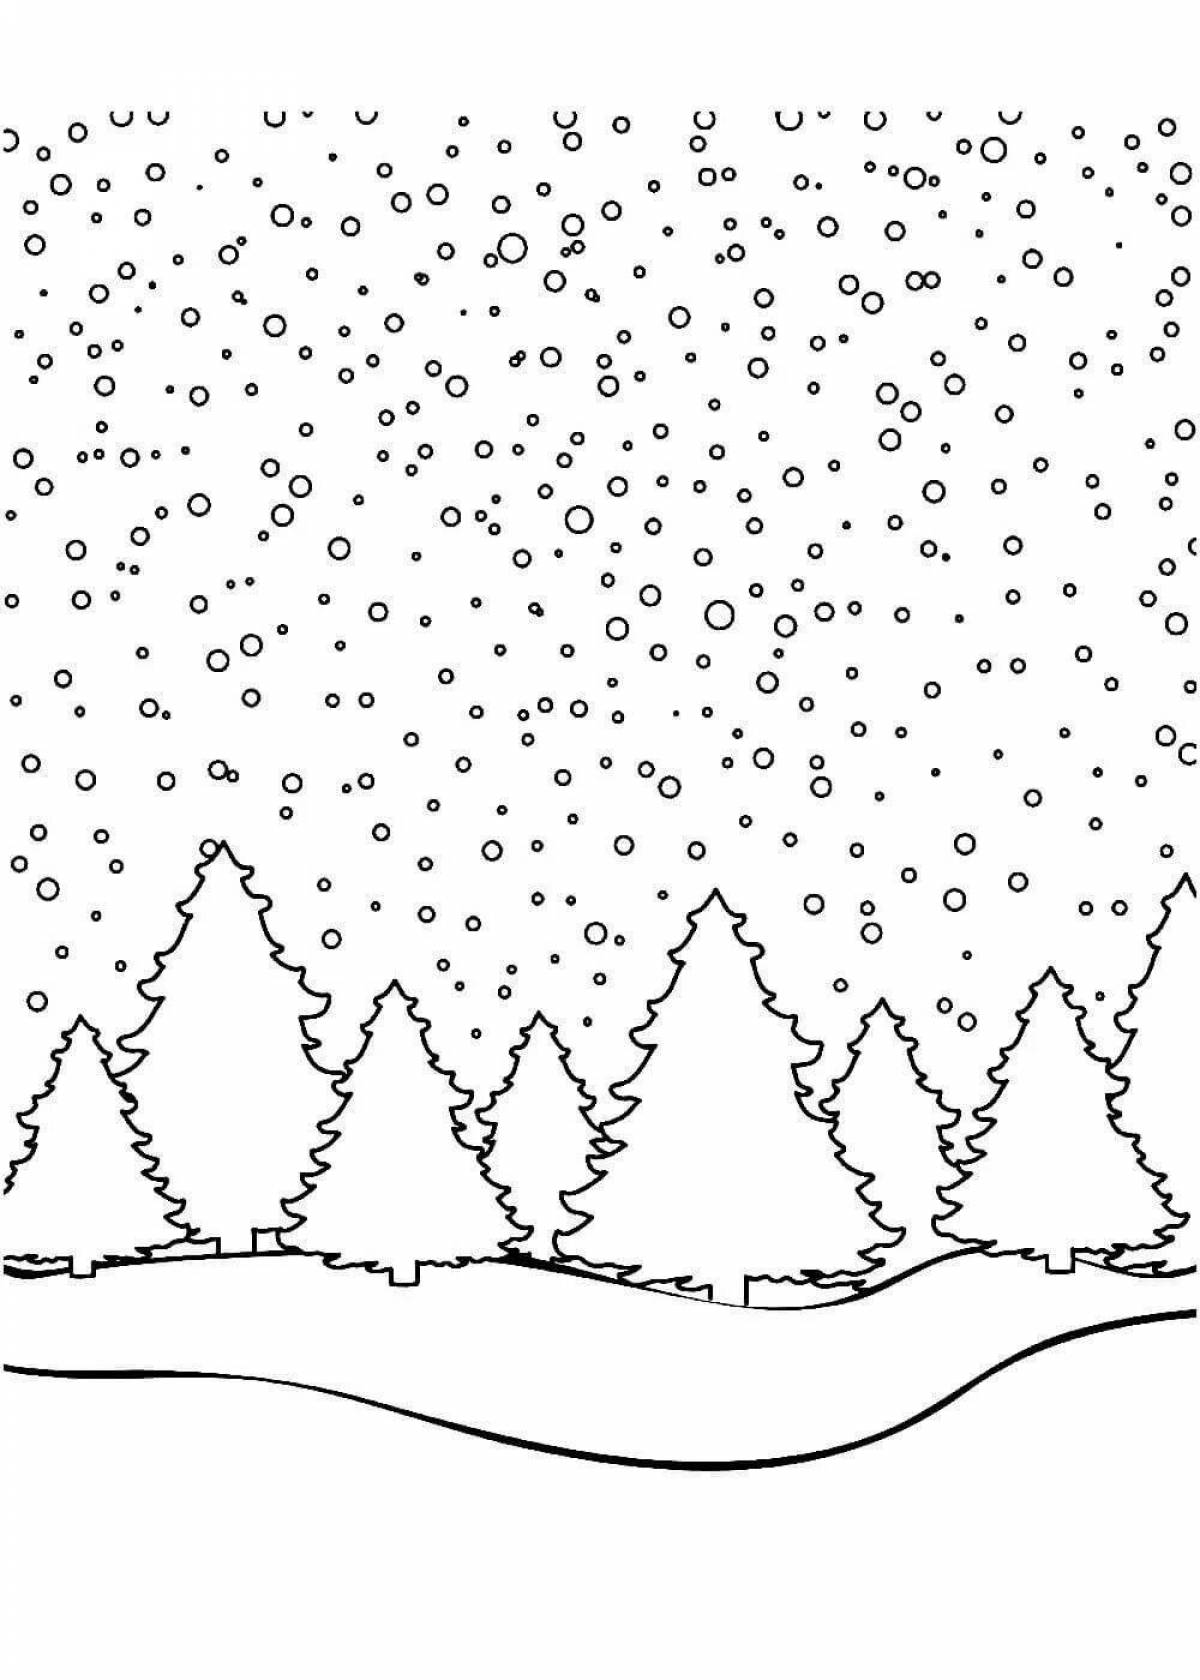 Great snowfall coloring book for kids